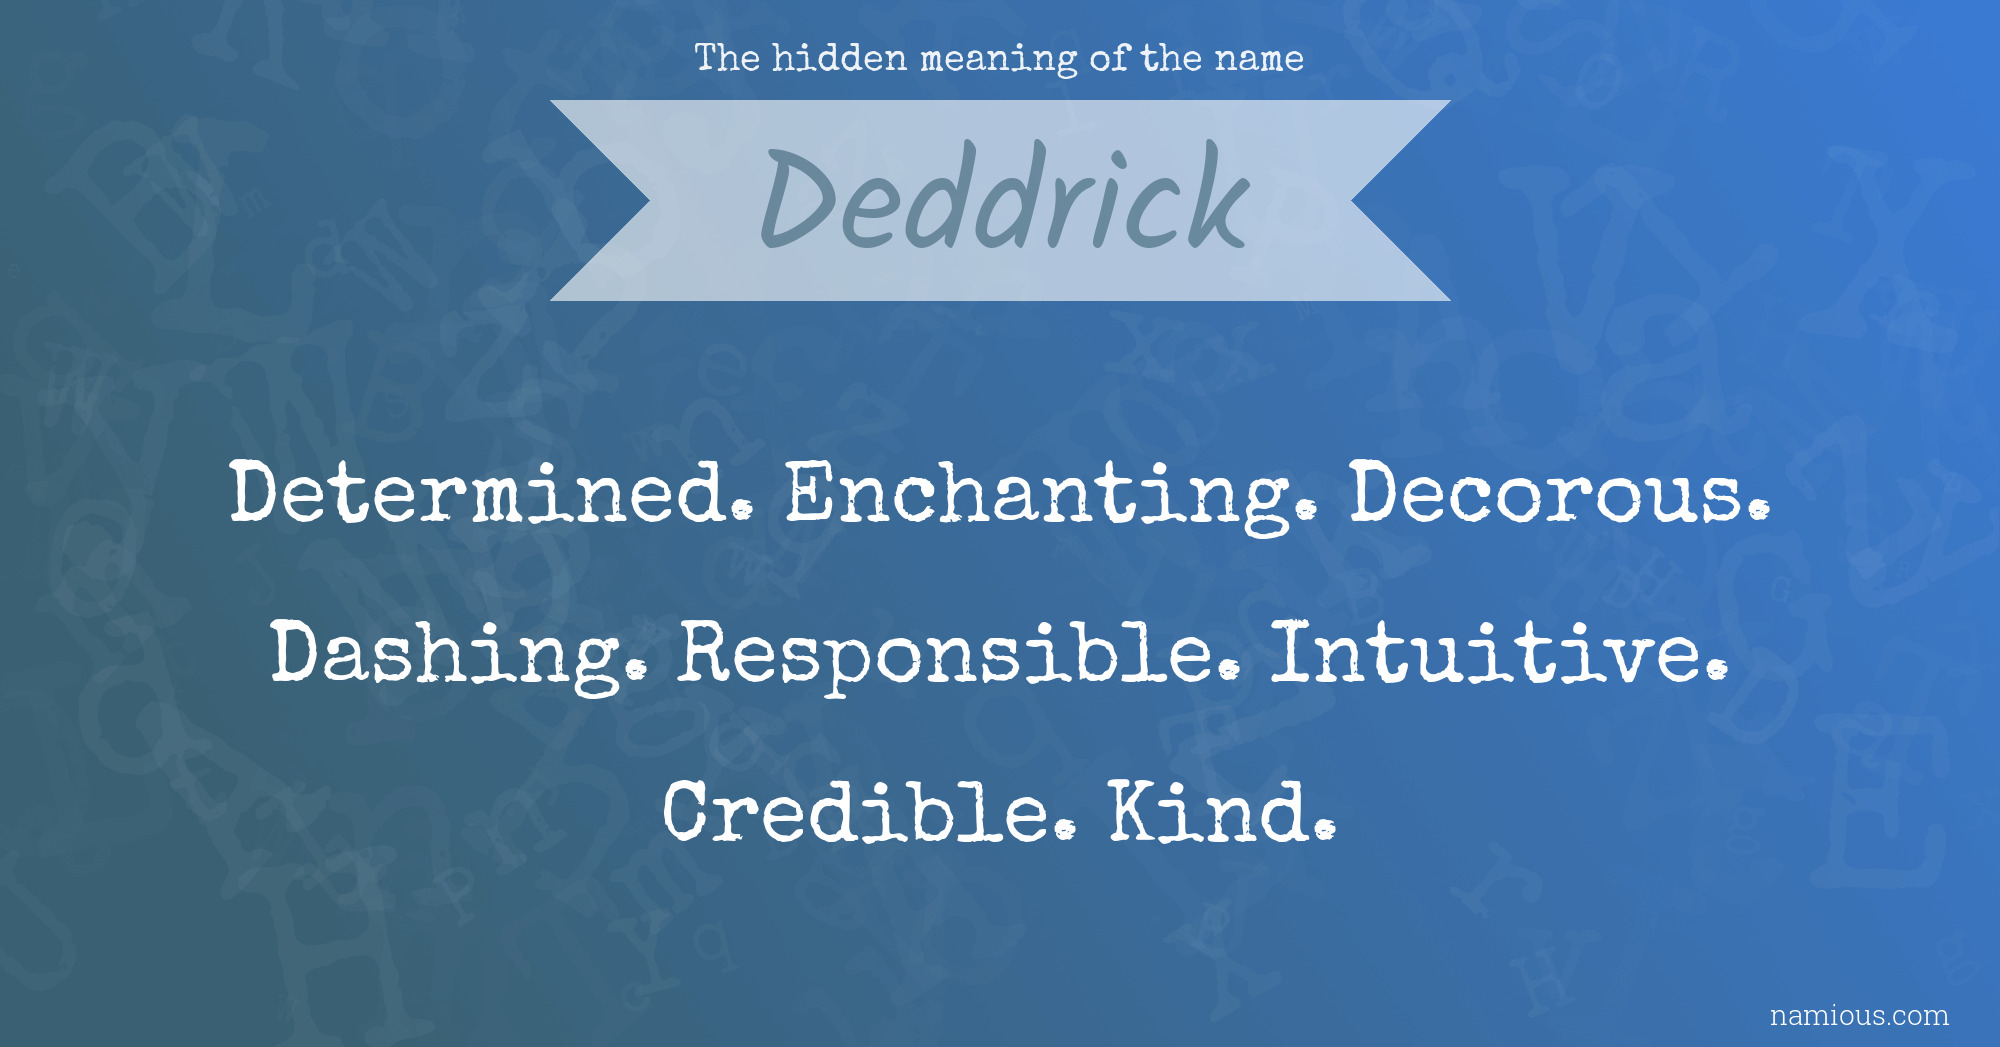 The hidden meaning of the name Deddrick